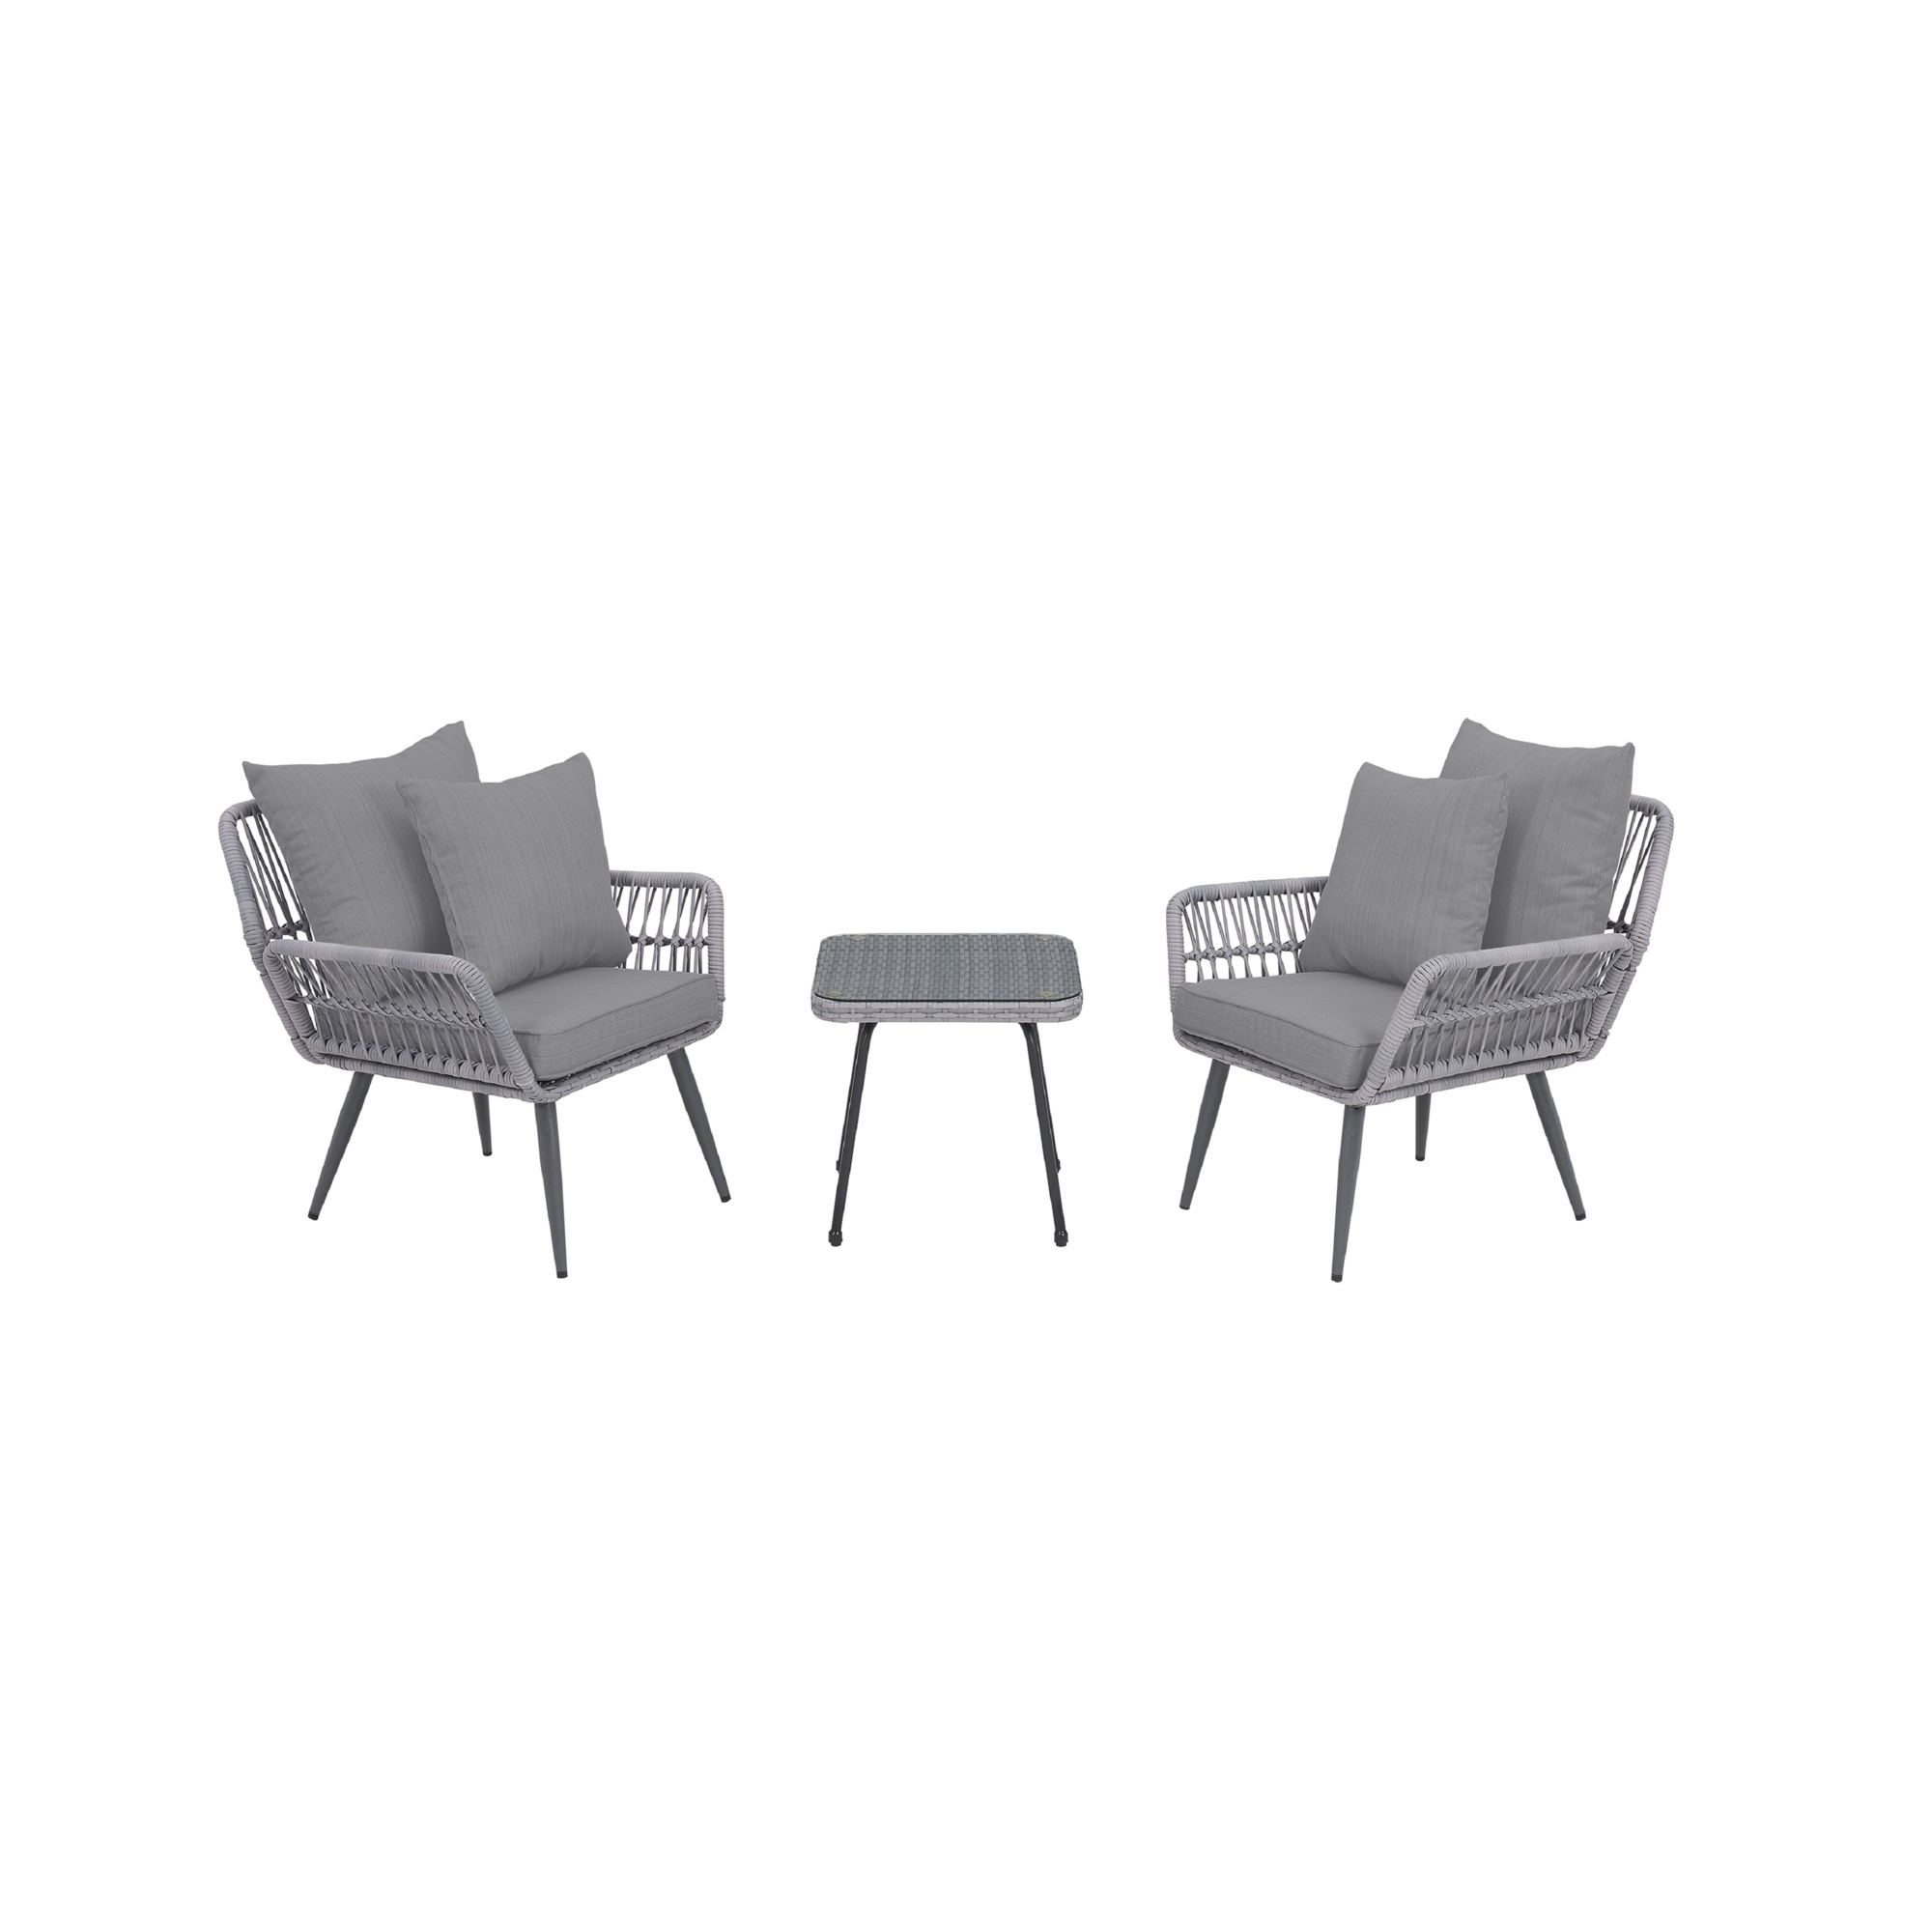 Manhattan Comfort, Cannes Rope Wicker 3Pc Patio Conv Set in Grey, Pieces (qty.) 3 Primary Color Gray, Seating Capacity 2 Model OD-CV012